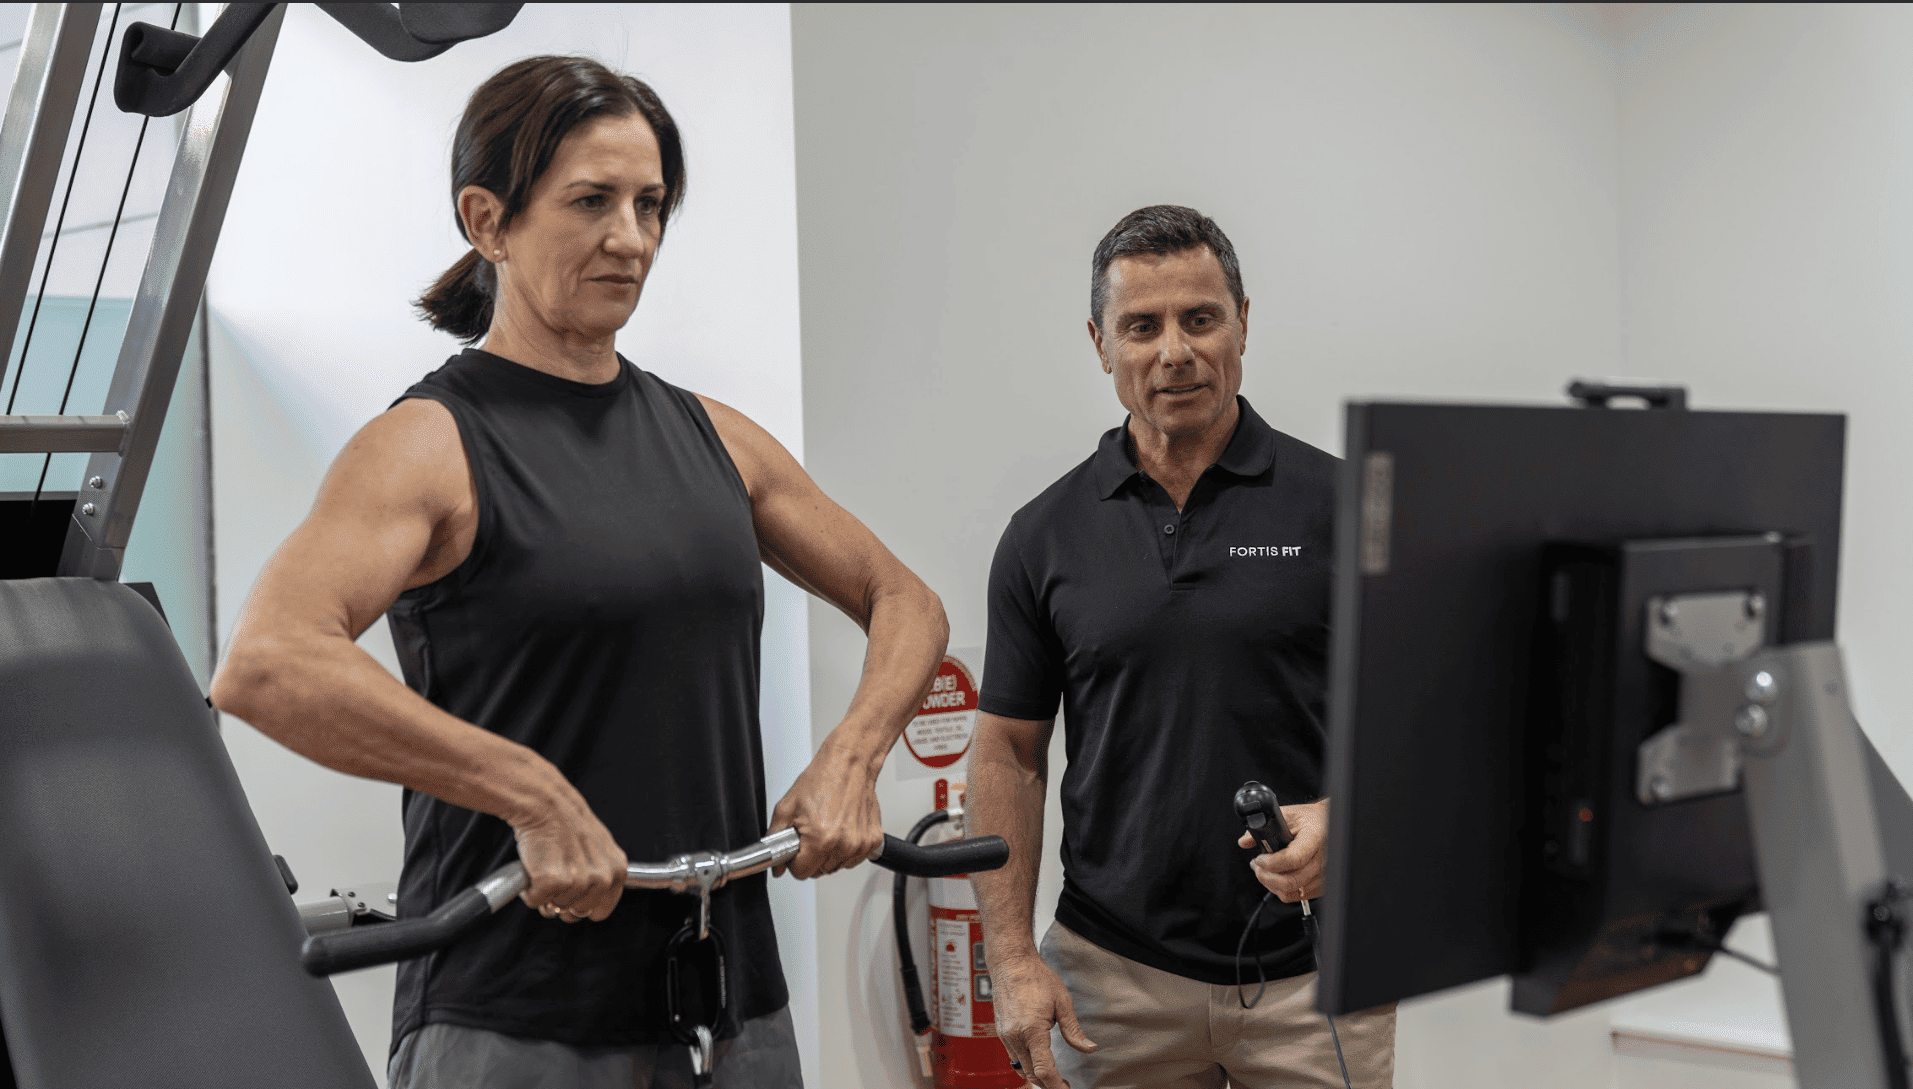 Personal trainer assisting a female client with strength training and weight loss at Fortis Fit Personal Training in Sydney.